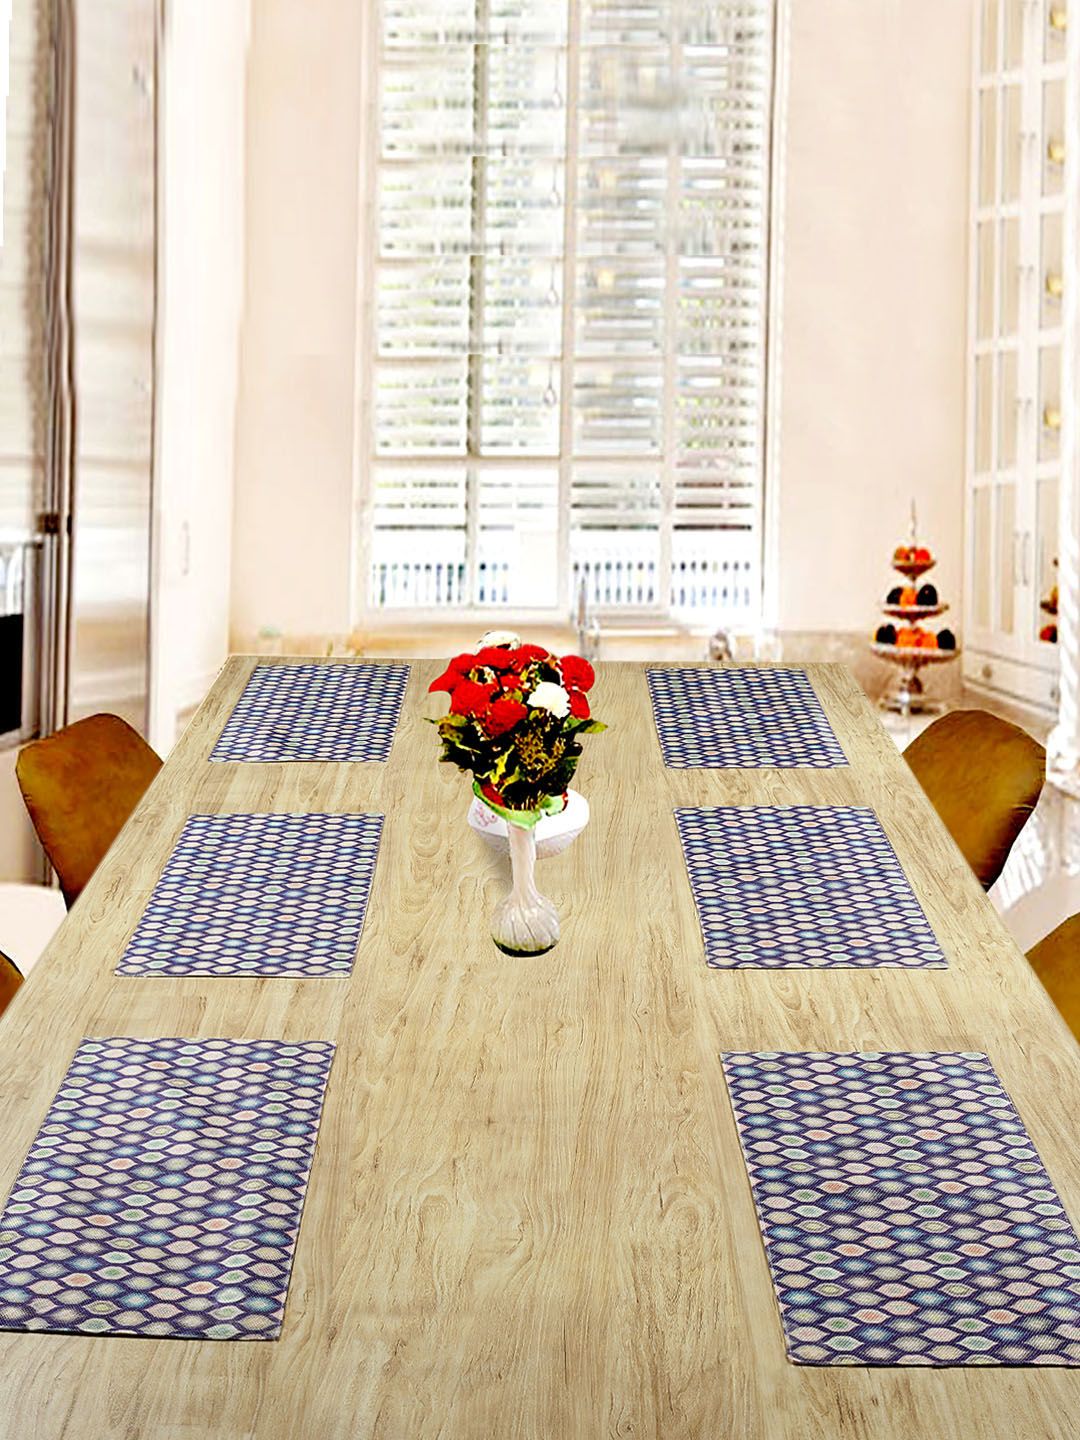 BELLA TRUE Set Of 6 White & Blue Digital Printed Rectangular Table Placemats Price in India